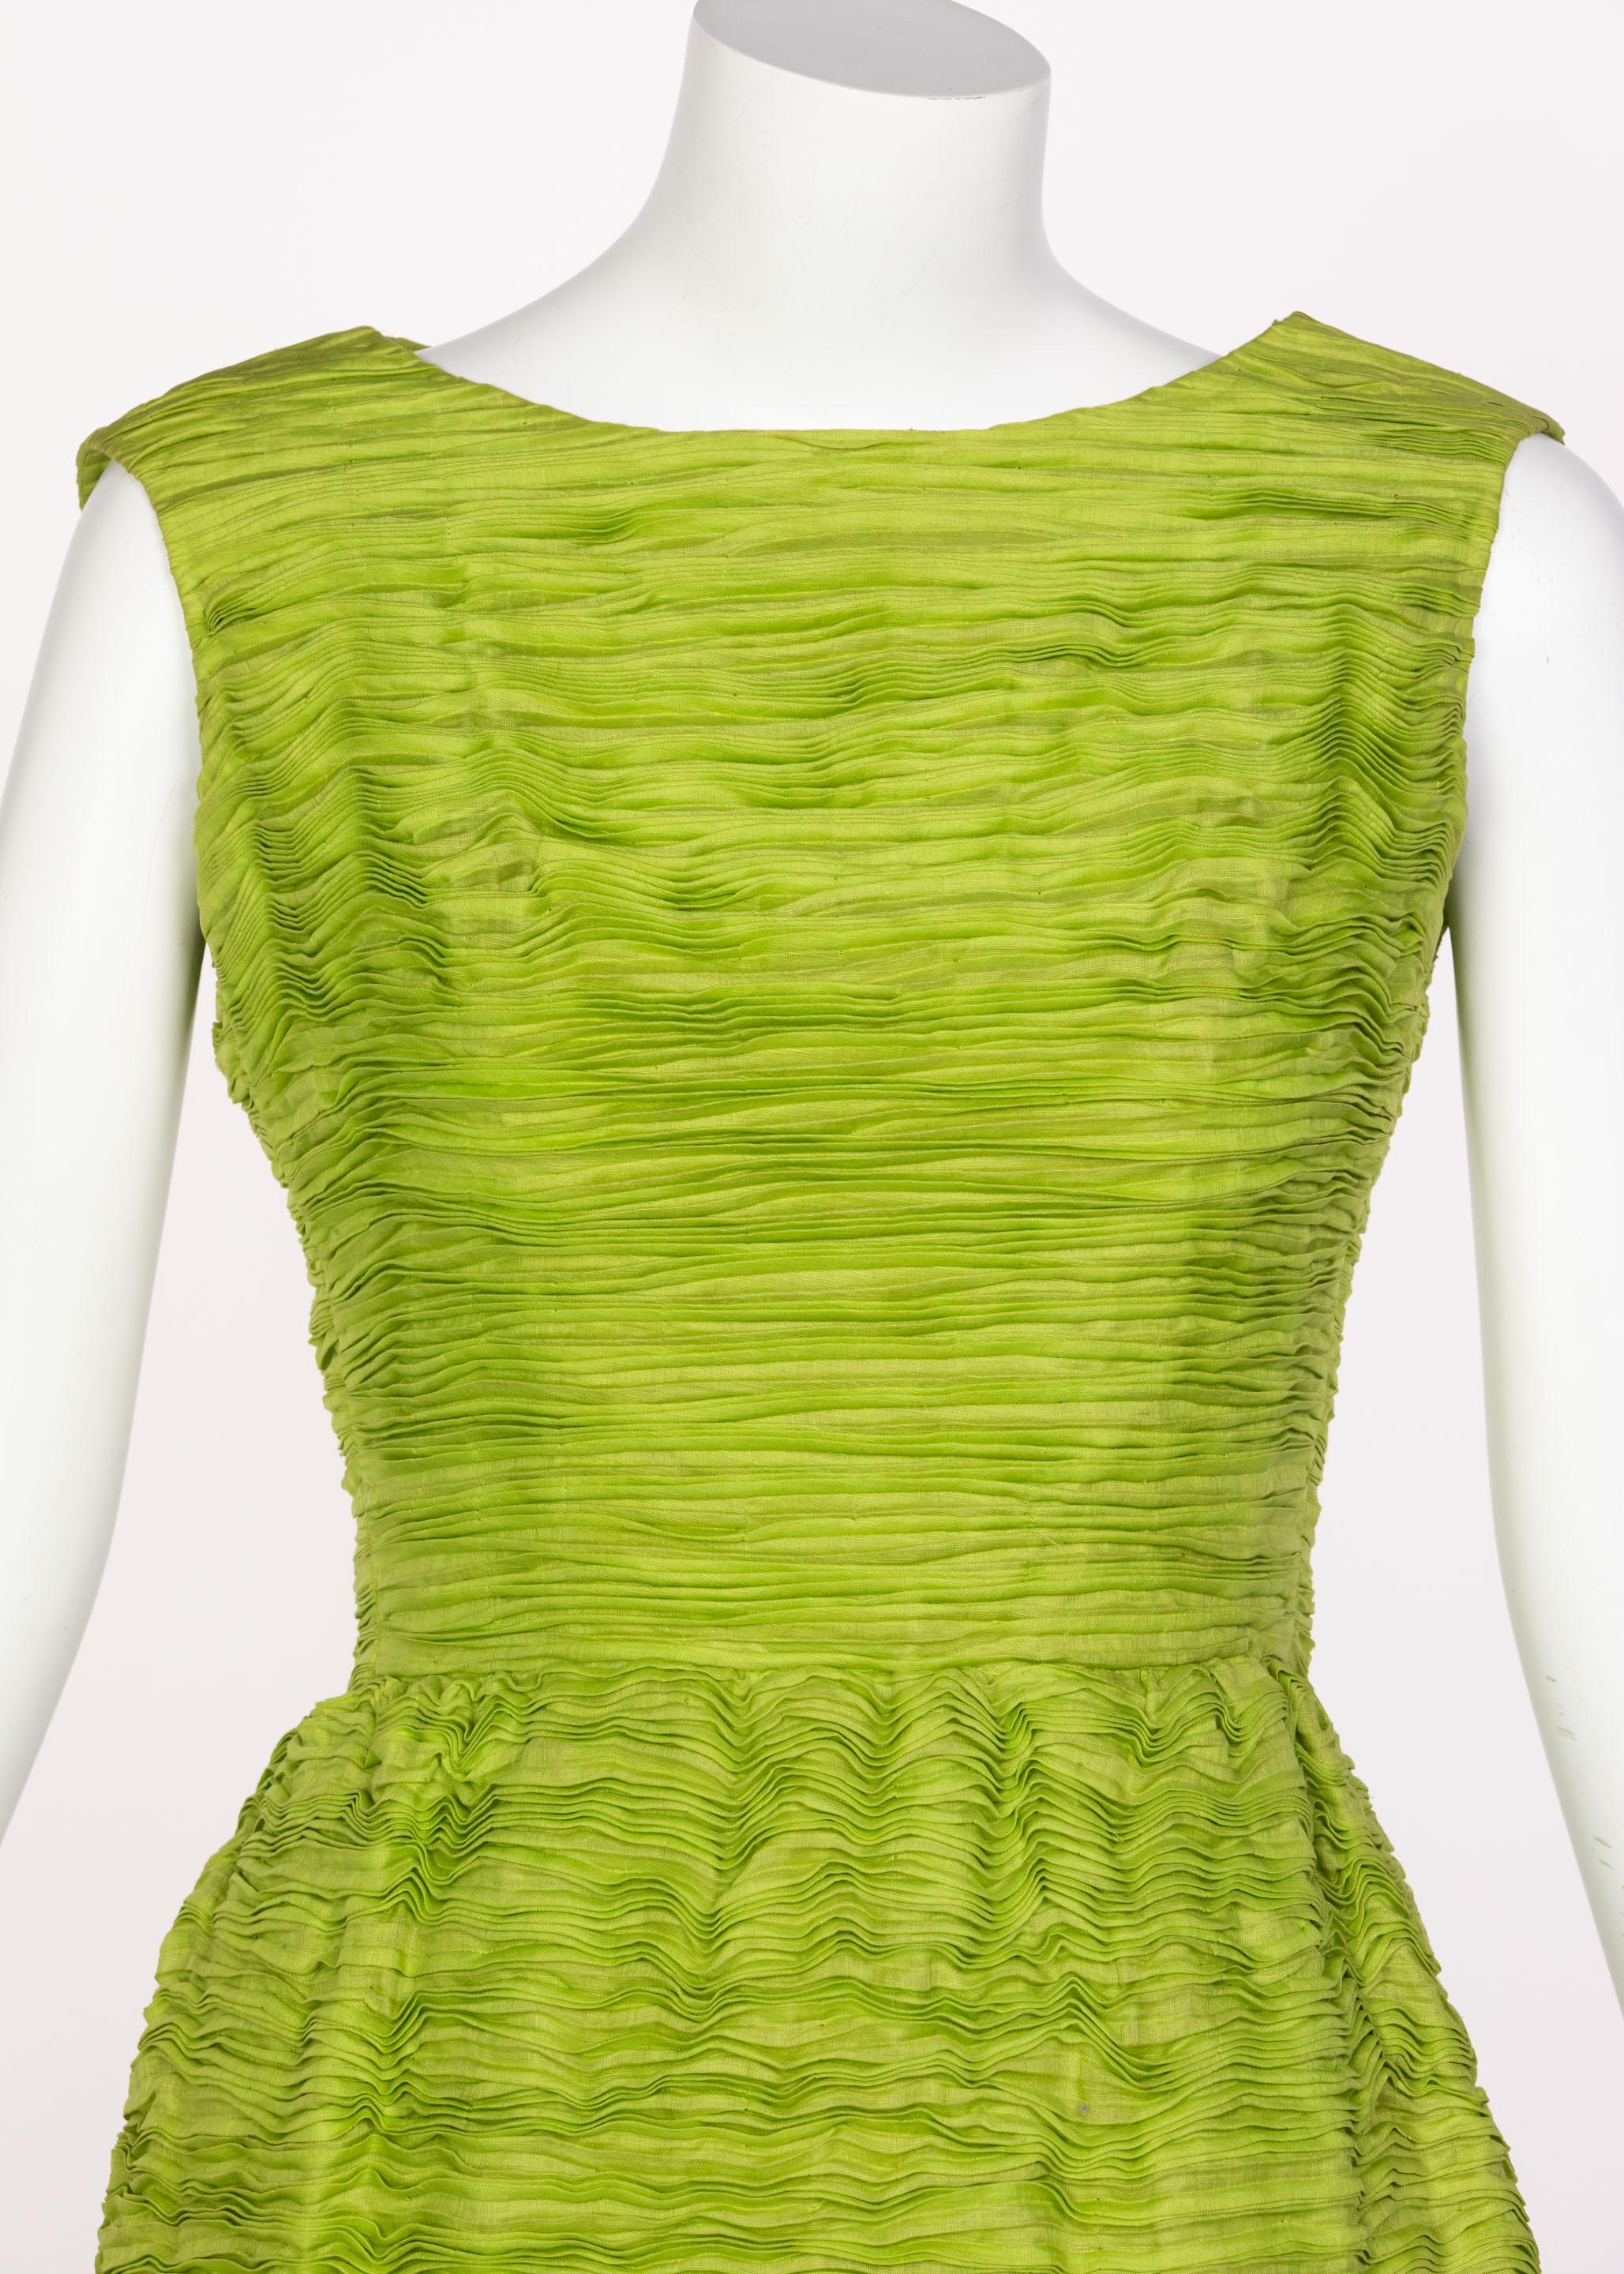 Sybil Connolly Couture Green Pleated Linen Dress, 1960s In Excellent Condition For Sale In Boca Raton, FL